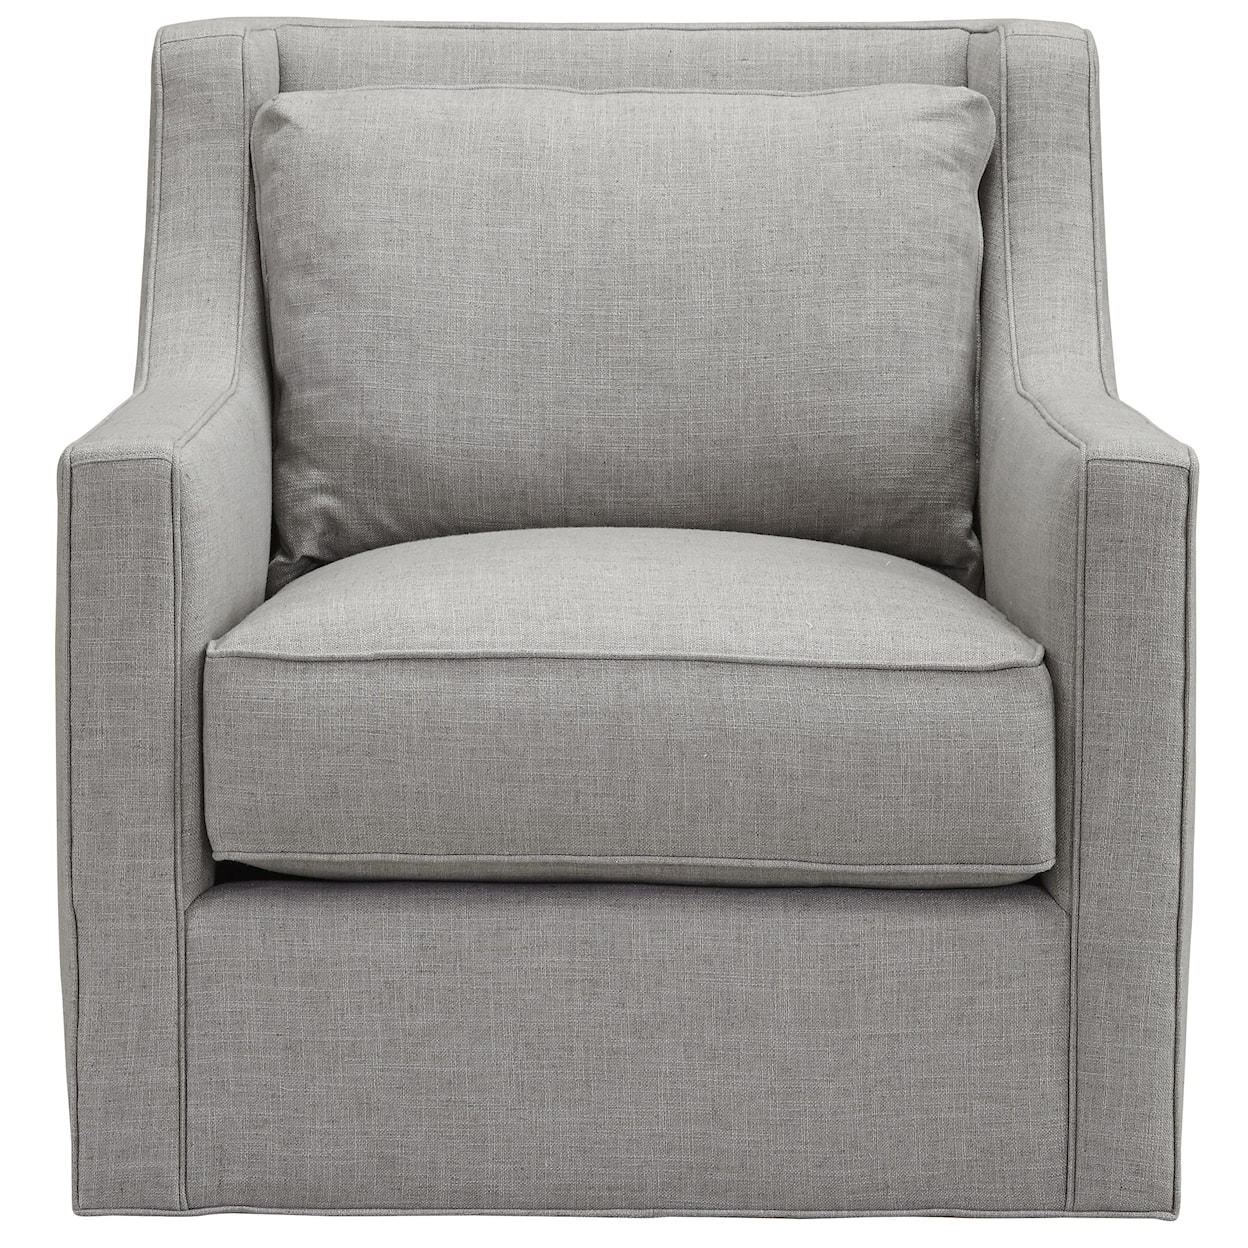 Southern Salina Upholstered Chair